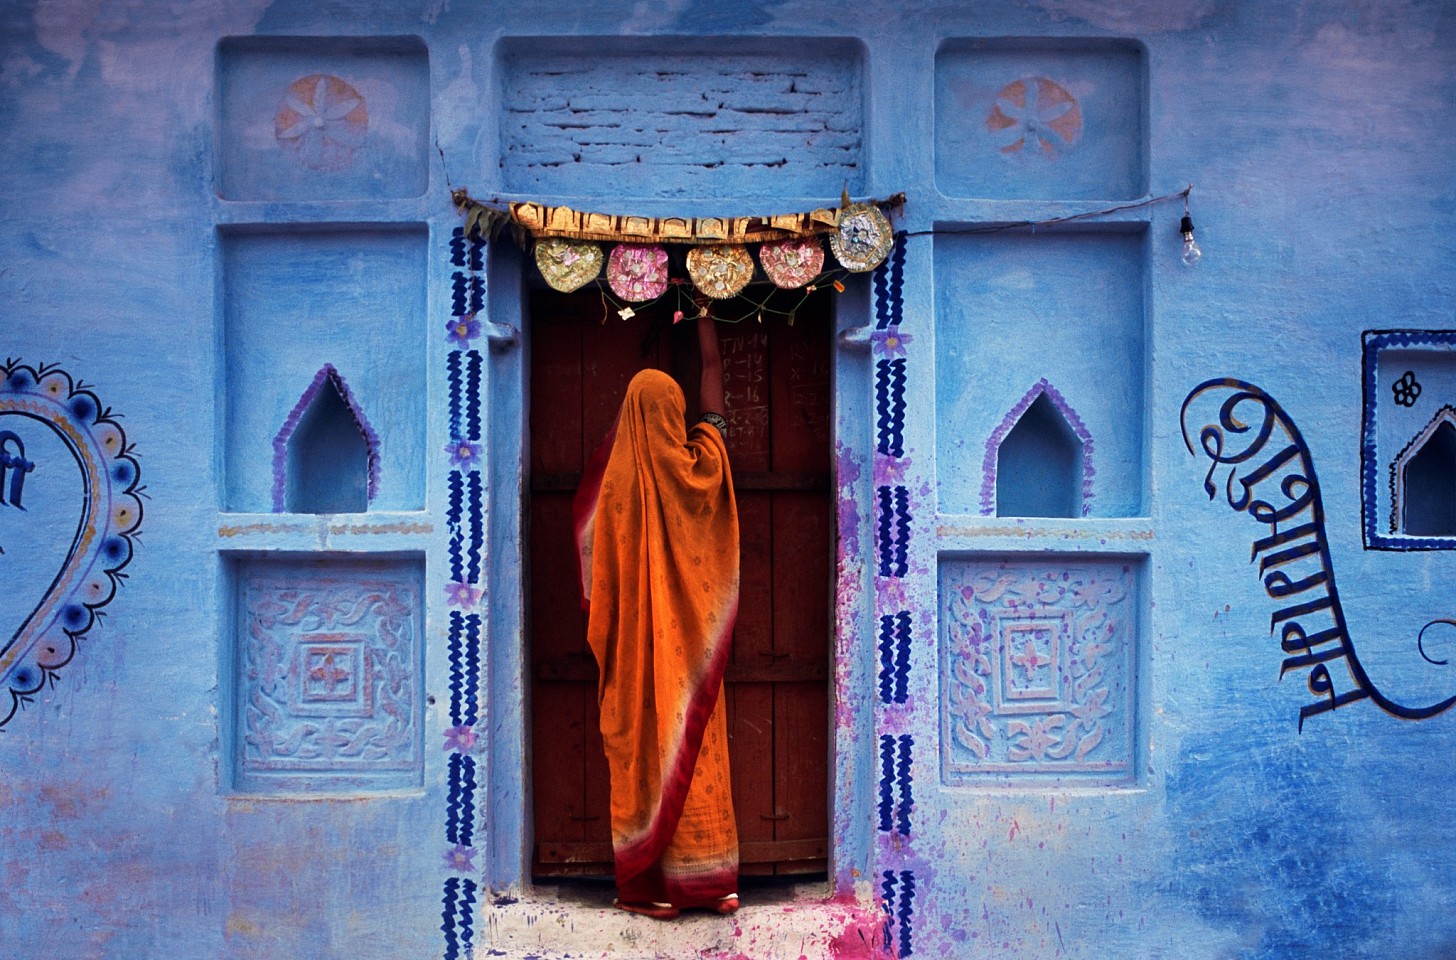 Jeffrey Becom, Wedding Wall, Naoli, Madhya, Pradesh, India, 2008
Pigment inkjet print, 16 x 24 in.
Signed, dated, titled & numbered in edition of 25, © Jeffrey Becom
$1,500